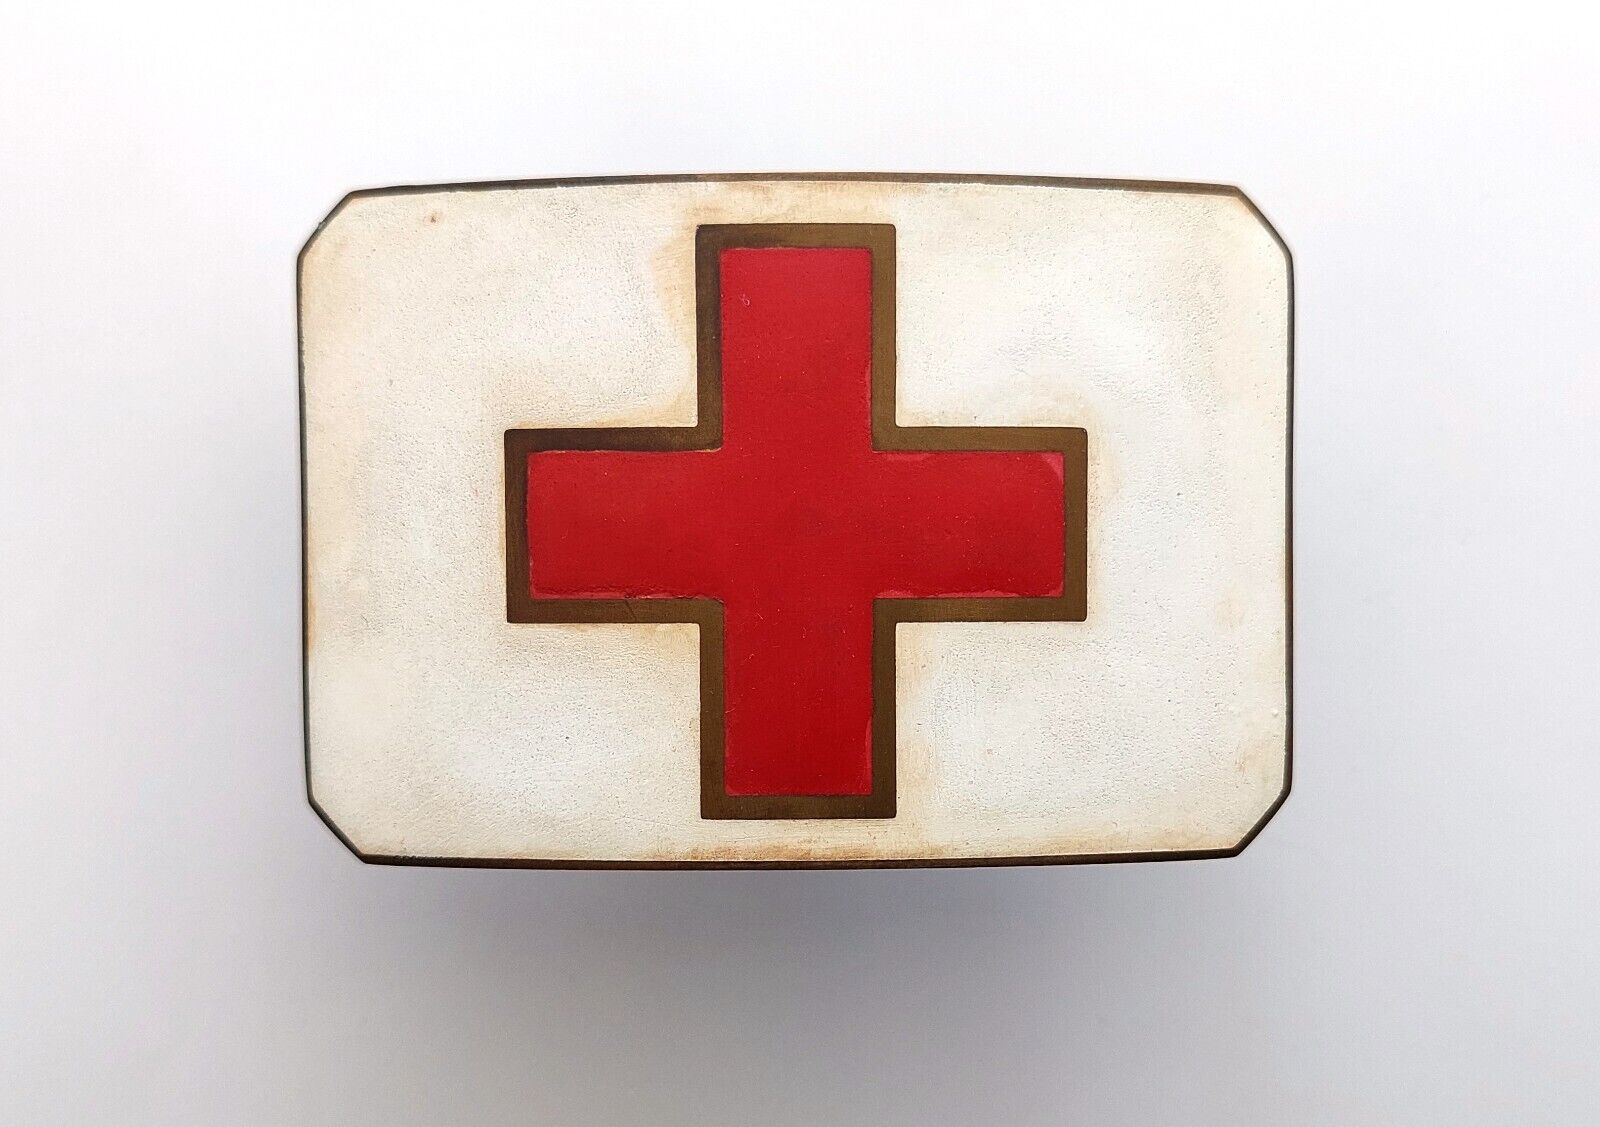 Rare Russia Belt Buckle Red Cross Doctor Orderly Nurse Military Hospital Medical